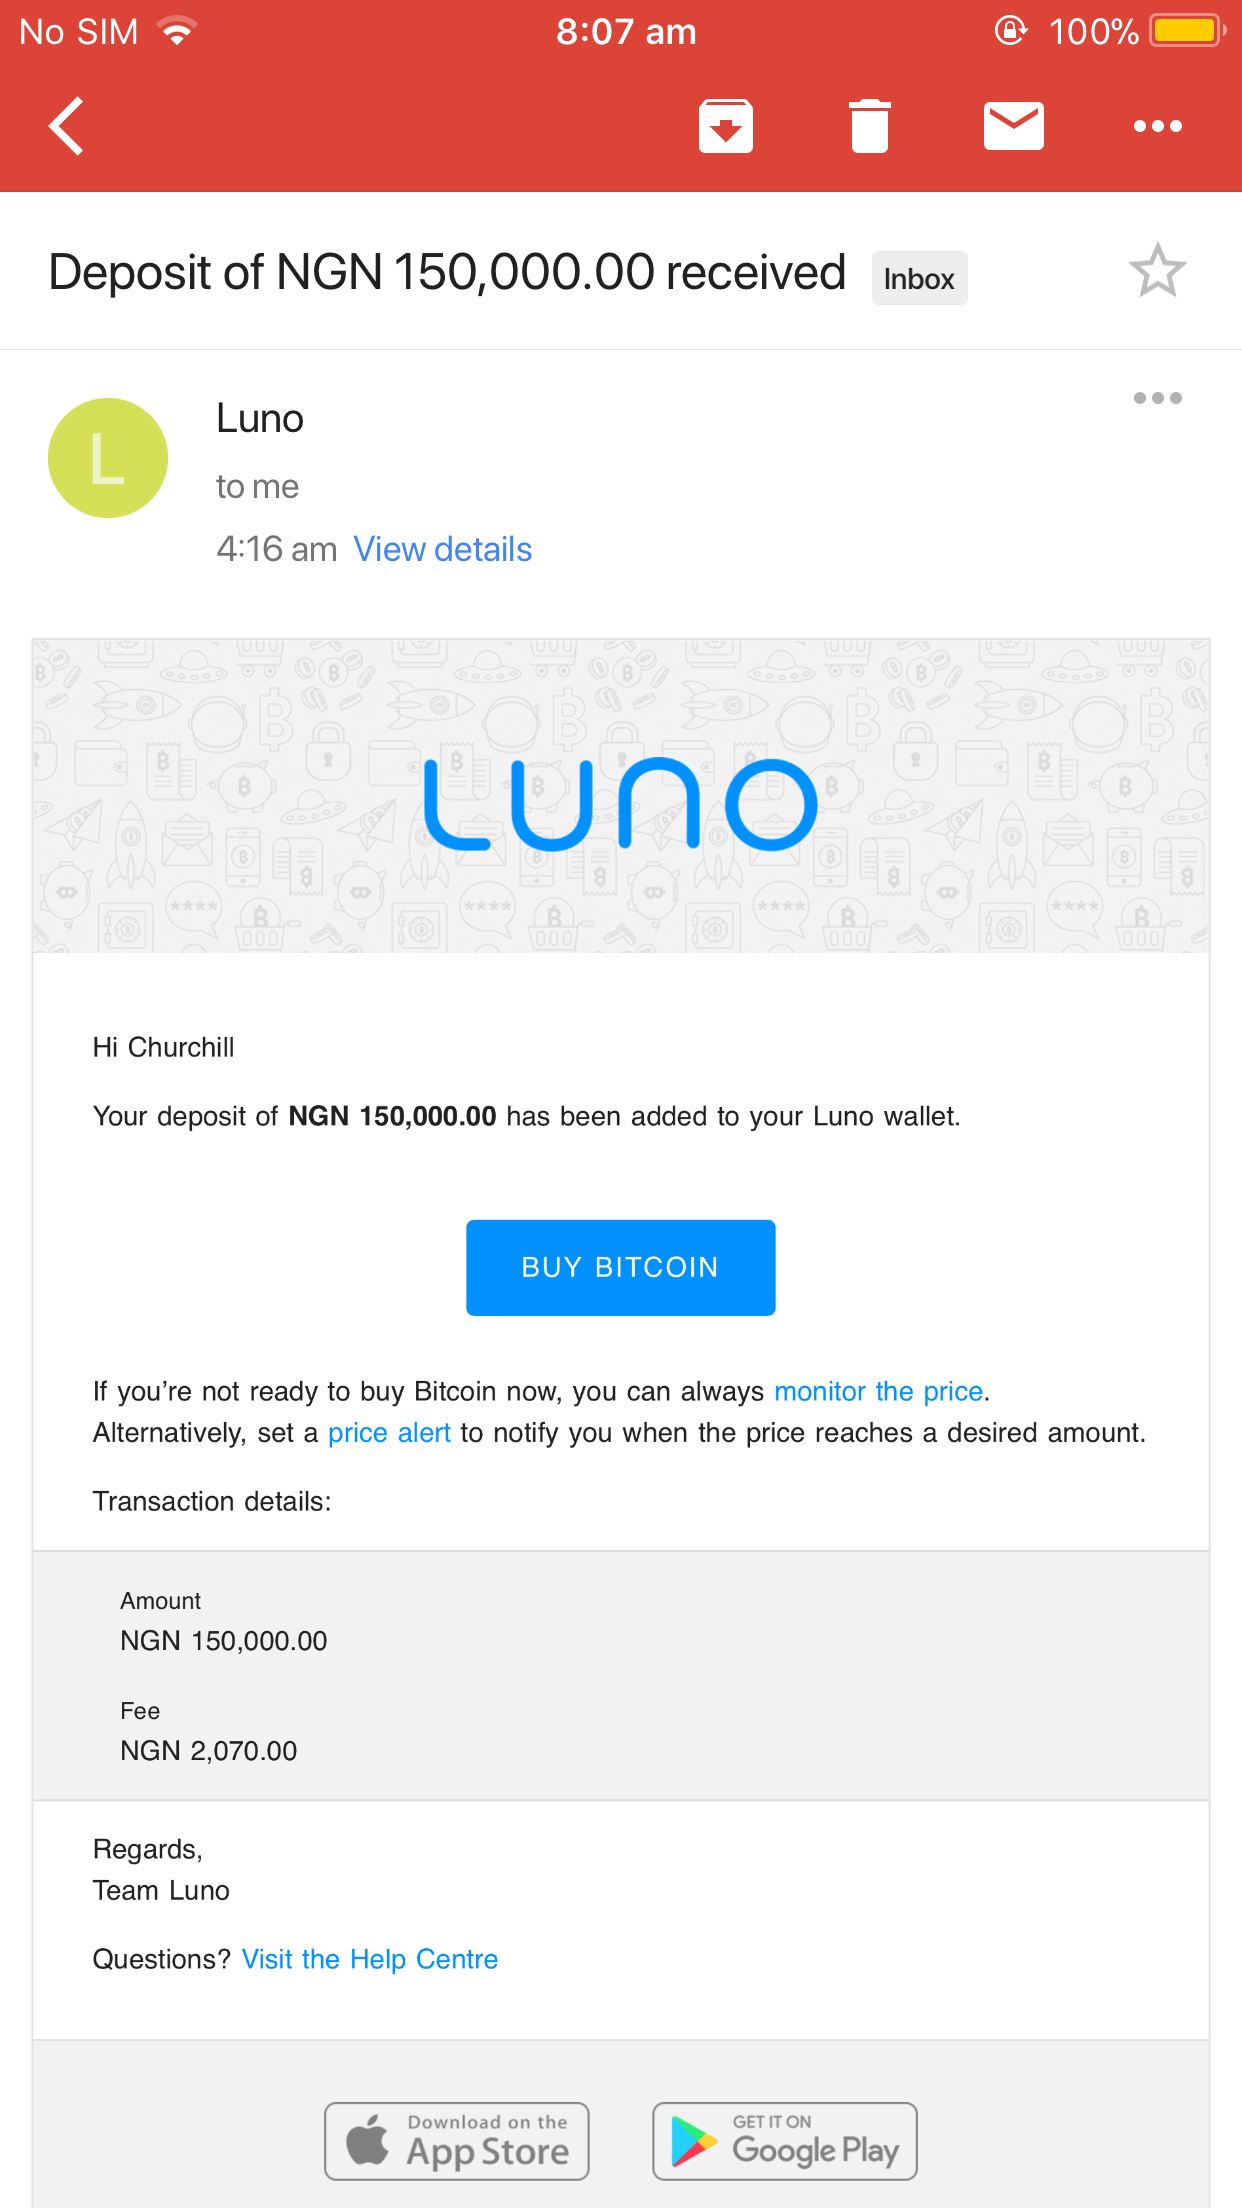 Still On Day 1 I Already Deposited About 155 000 On My Luno Ngn - 